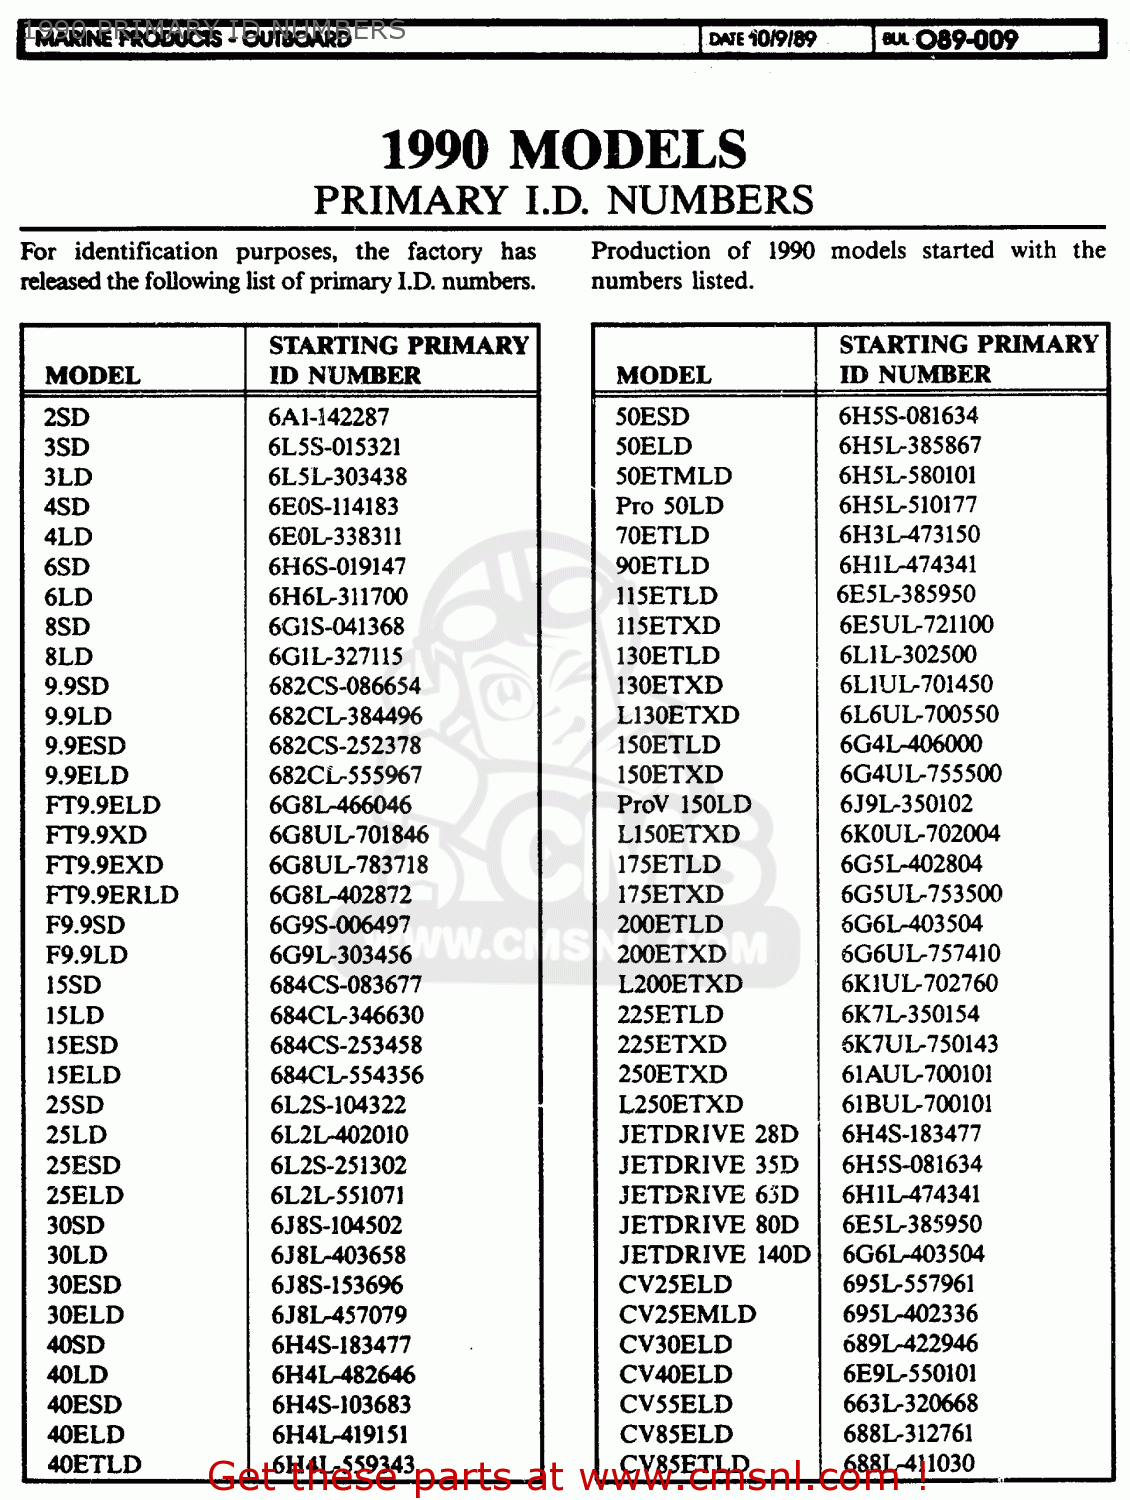 Honda outboards id numbers #5